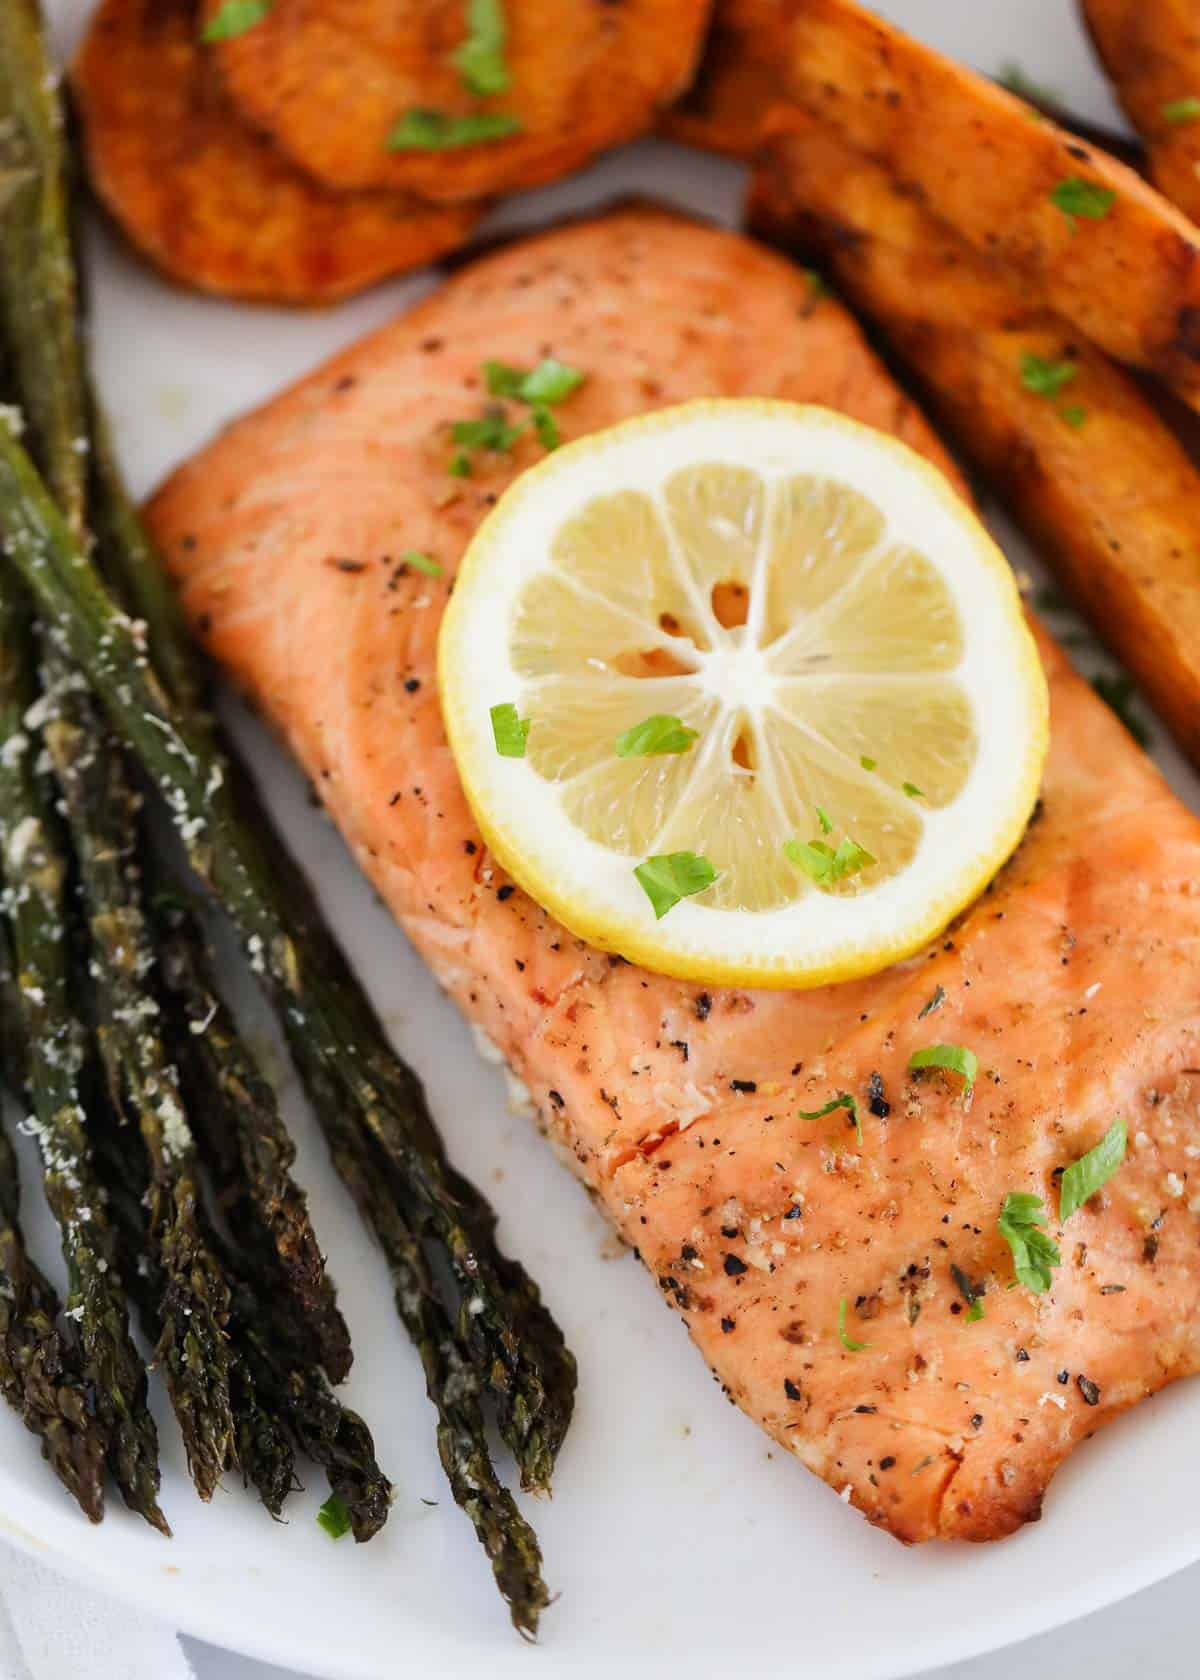 Salmon, asparagus, and sweet potatoes on white plate.